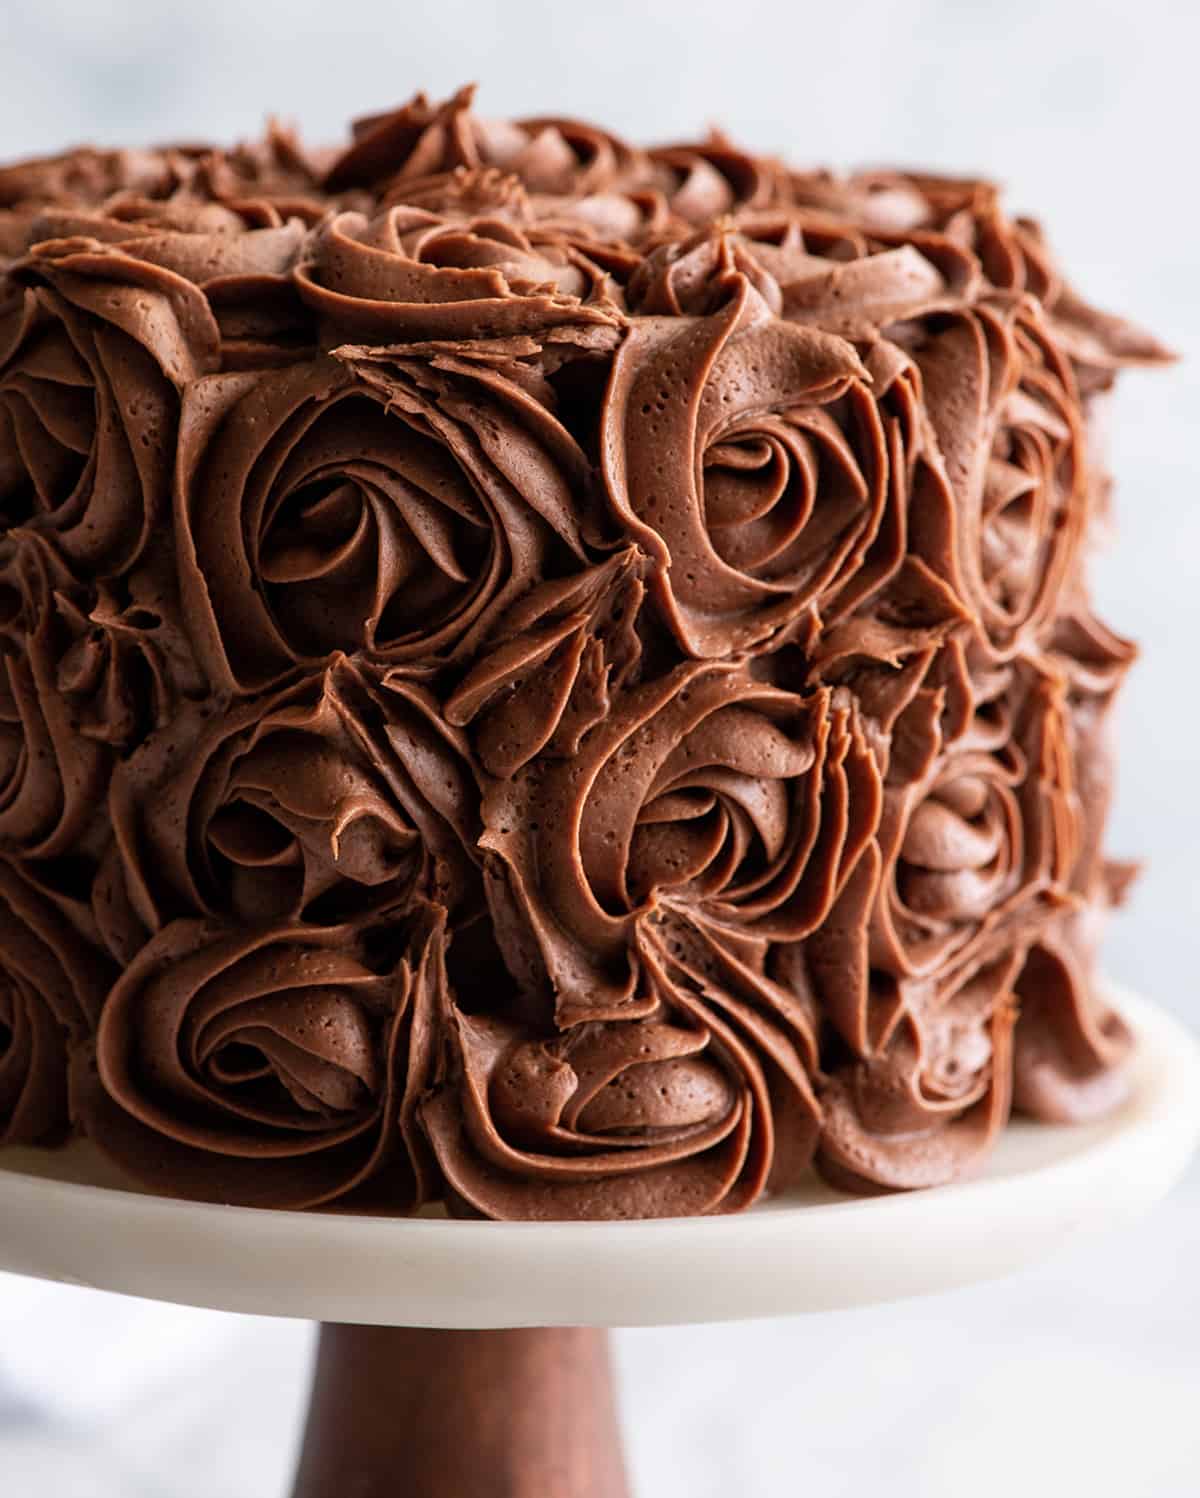 front view of a cake decorated with chocolate buttercream frosting rosettes